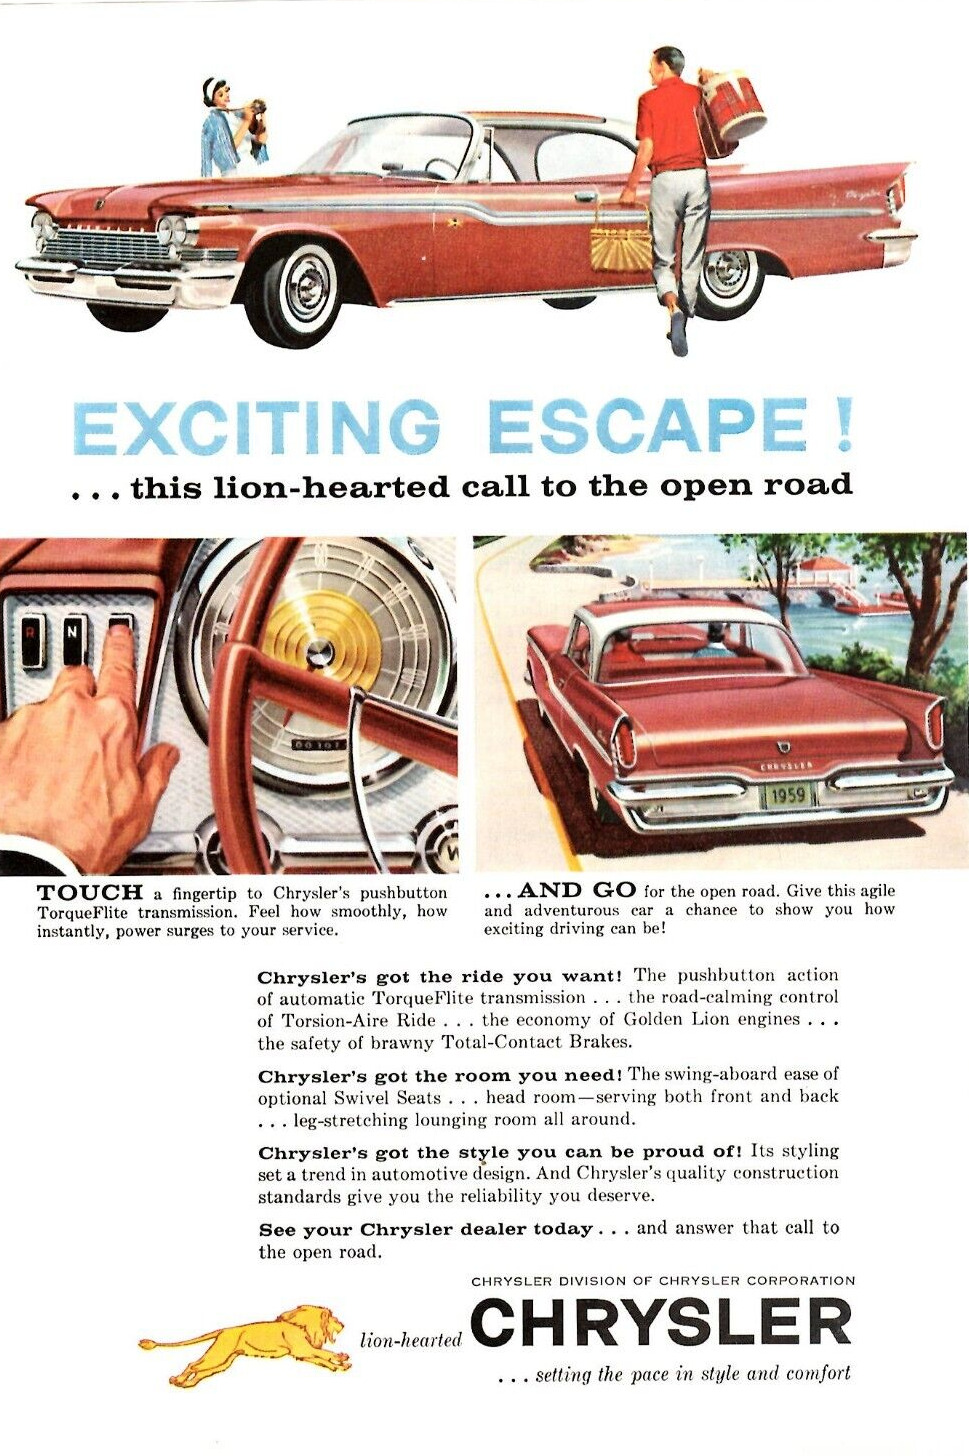 1959 Print Ad Chrysler Lion-Hearted Exciting Escape TorqueFlite Transmission